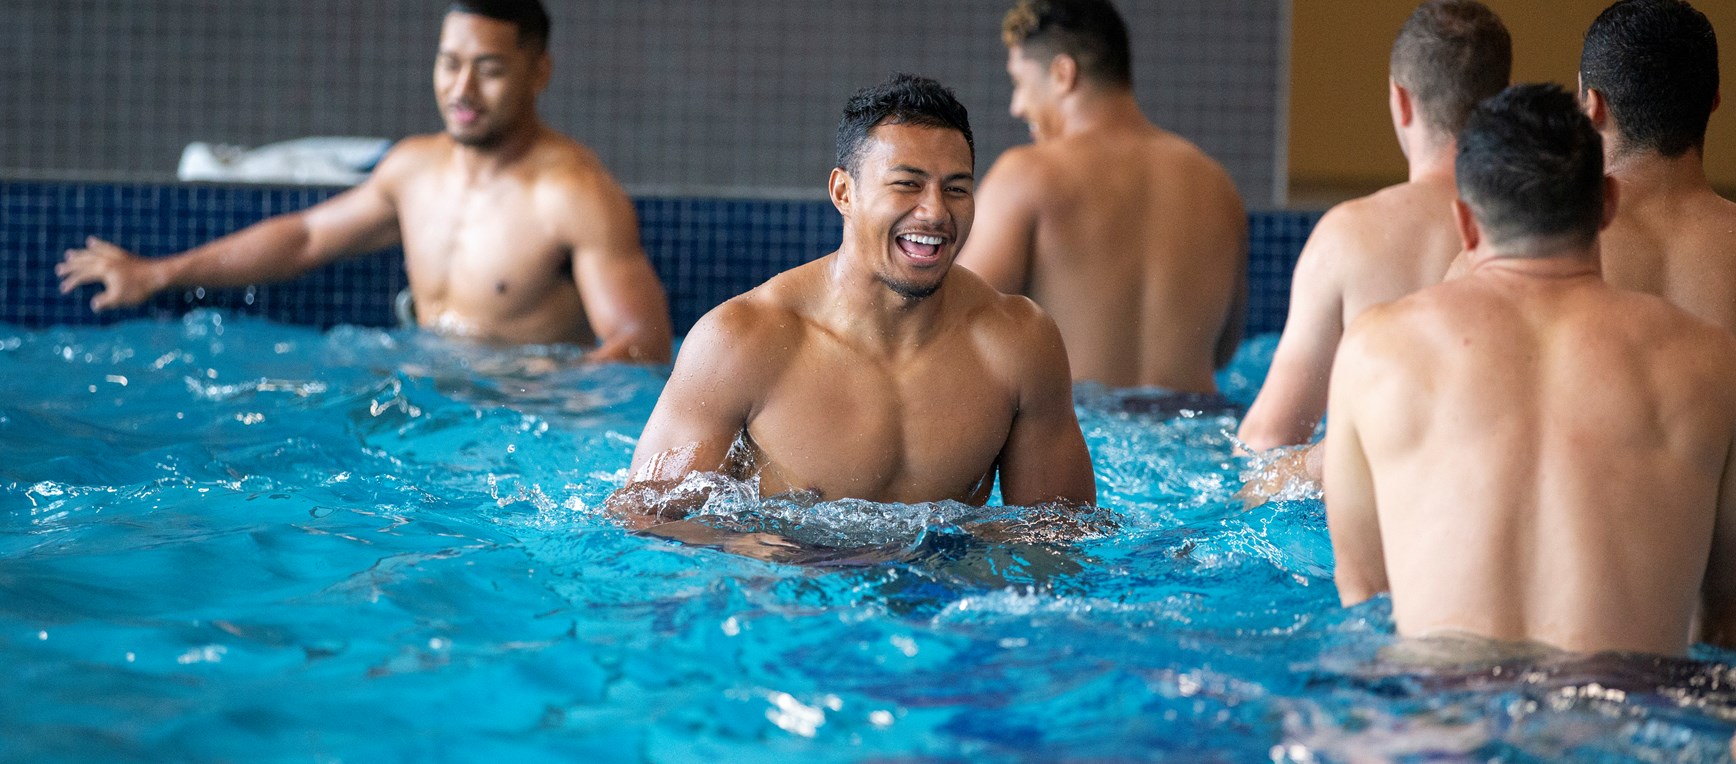 Cowboys get first look at new recovery pools